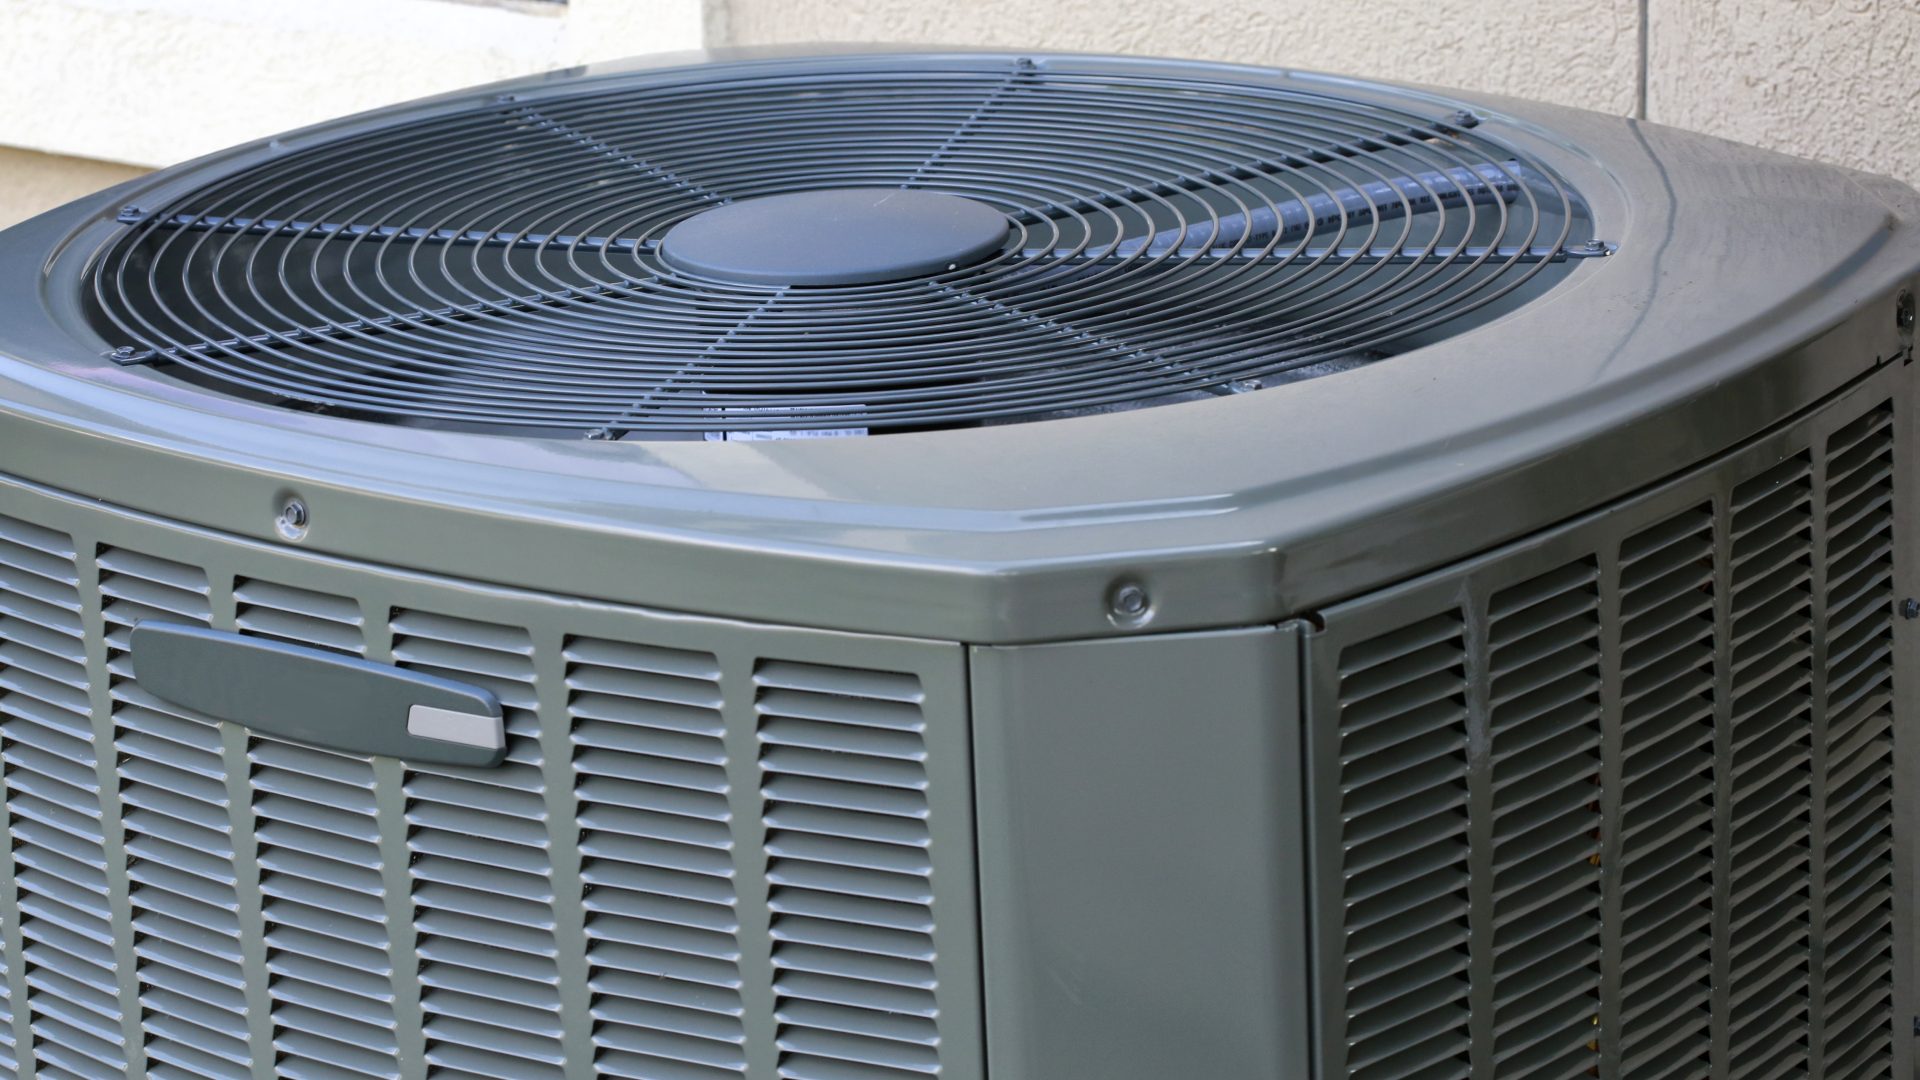 What temperature does the average homeowner keep their AC on in Florida?